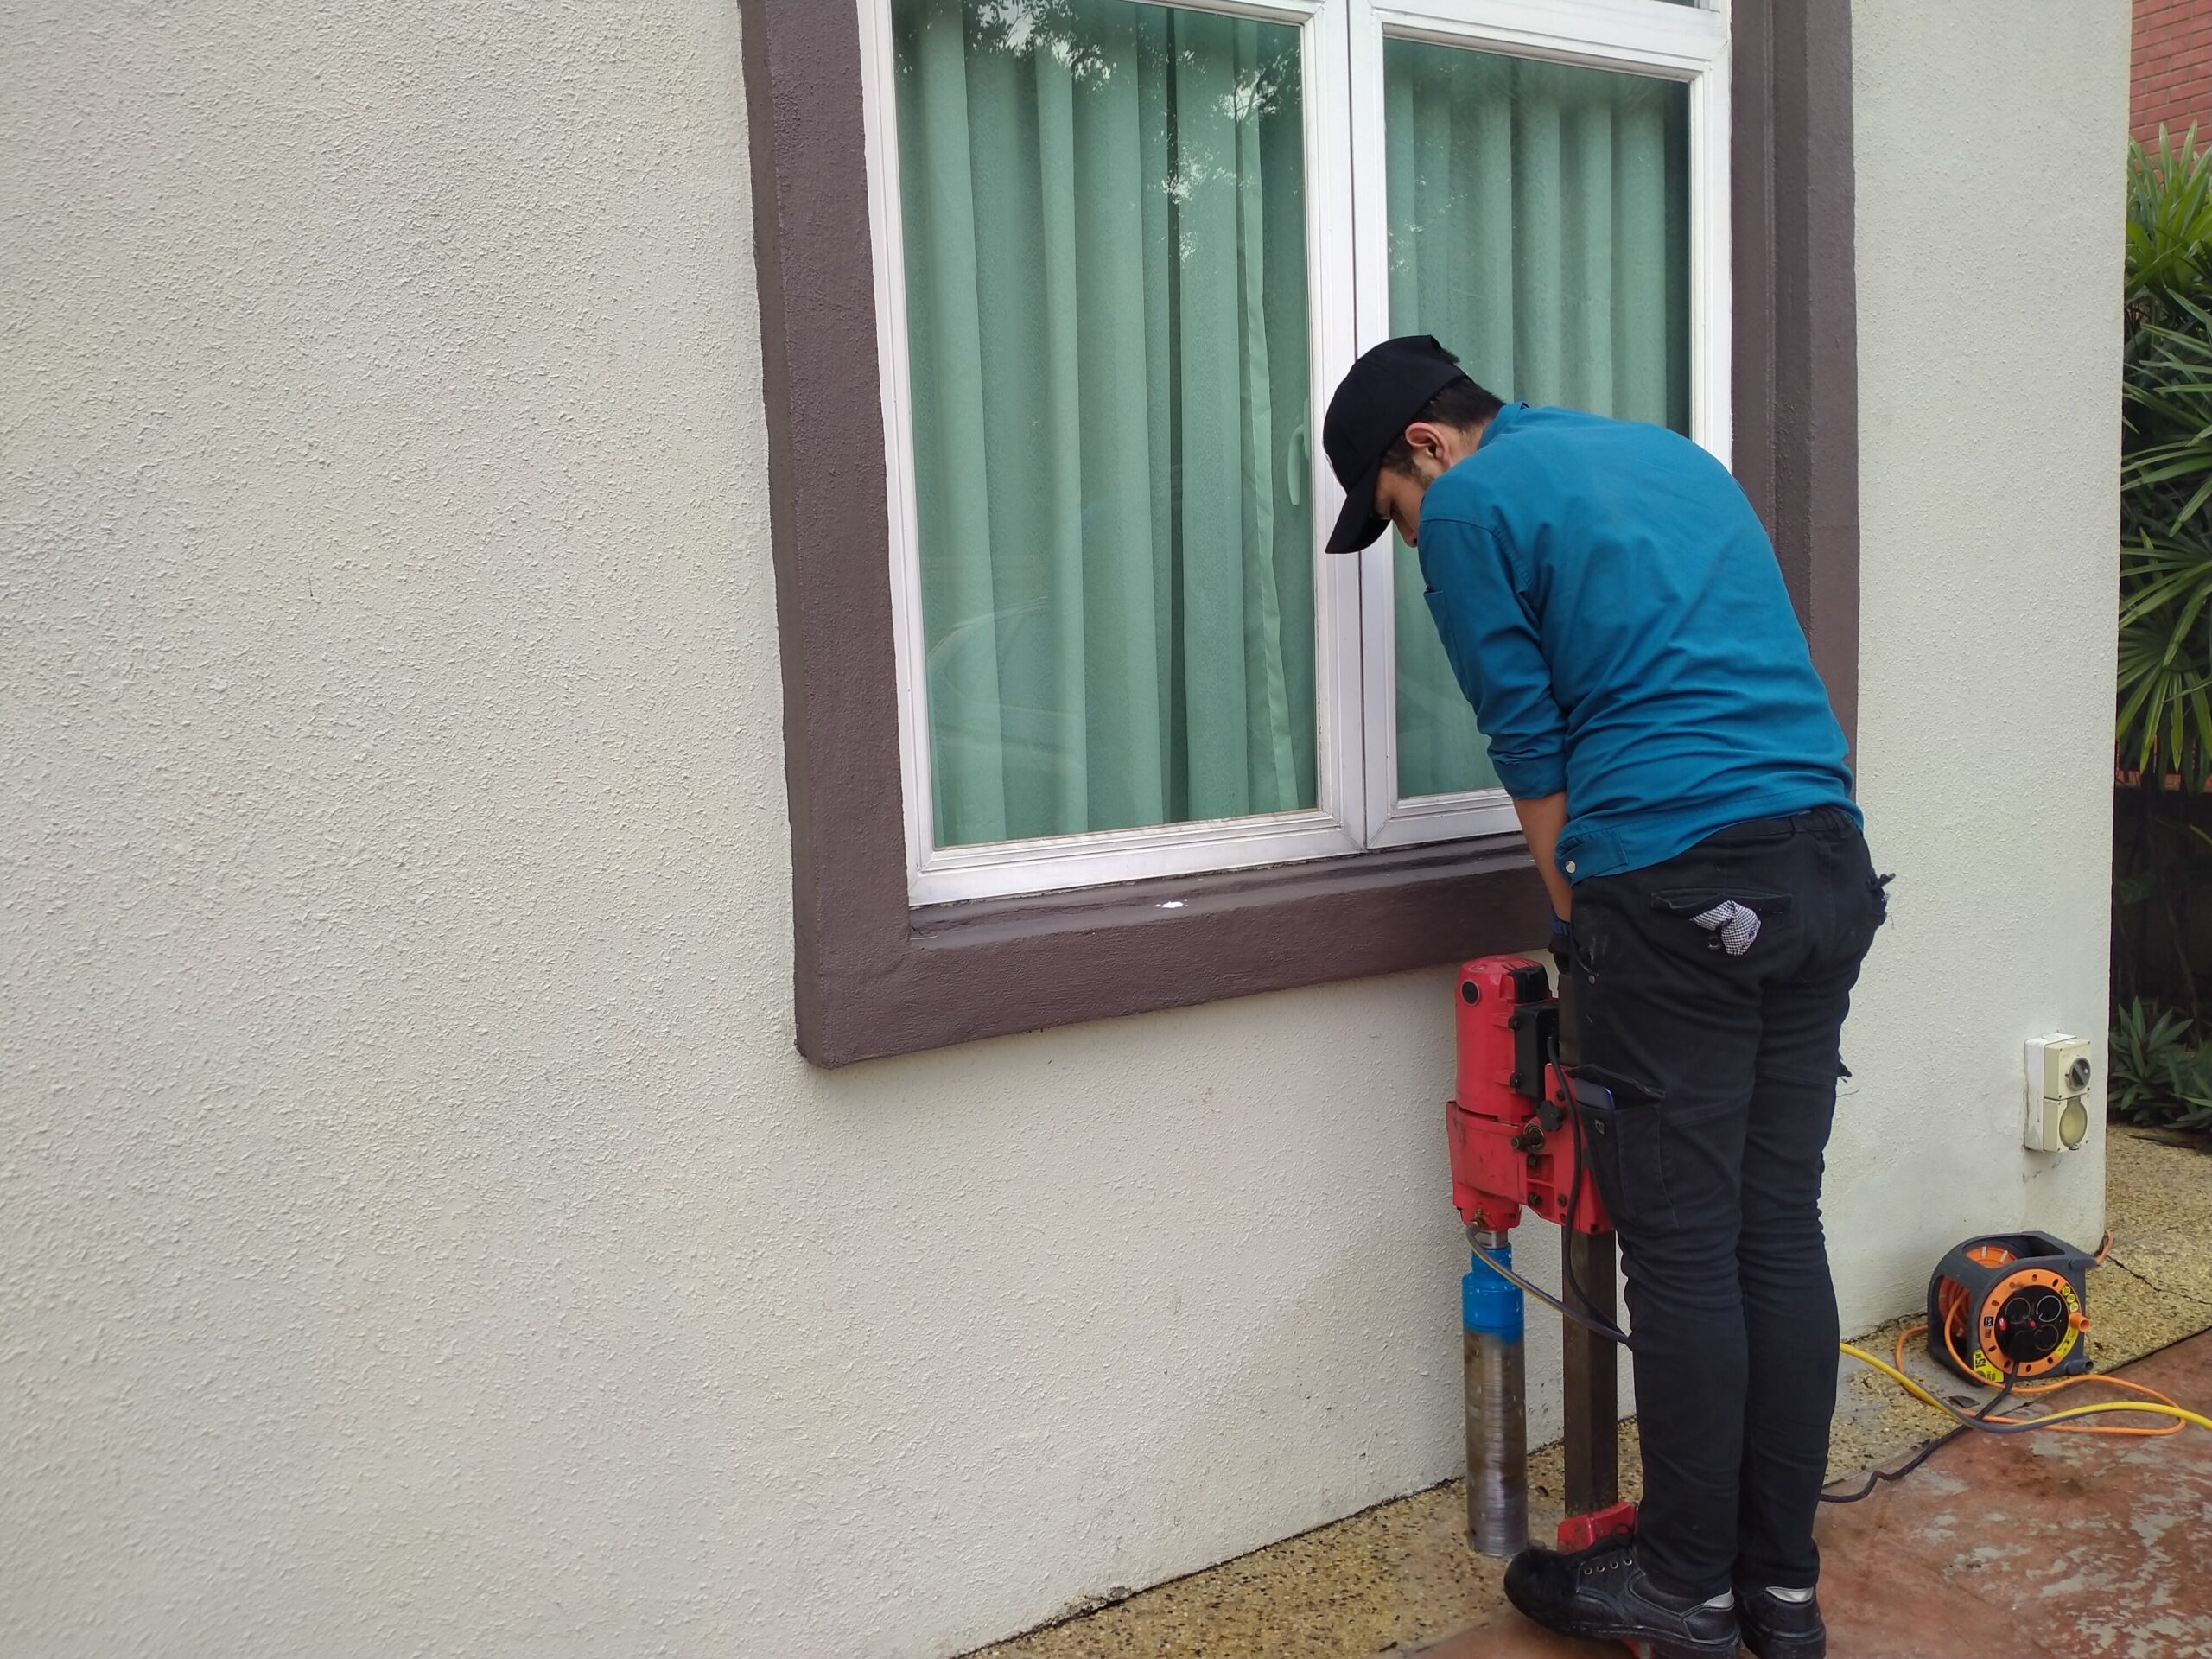 Corrective soil treatment is being done by a staff during termite pest control service.